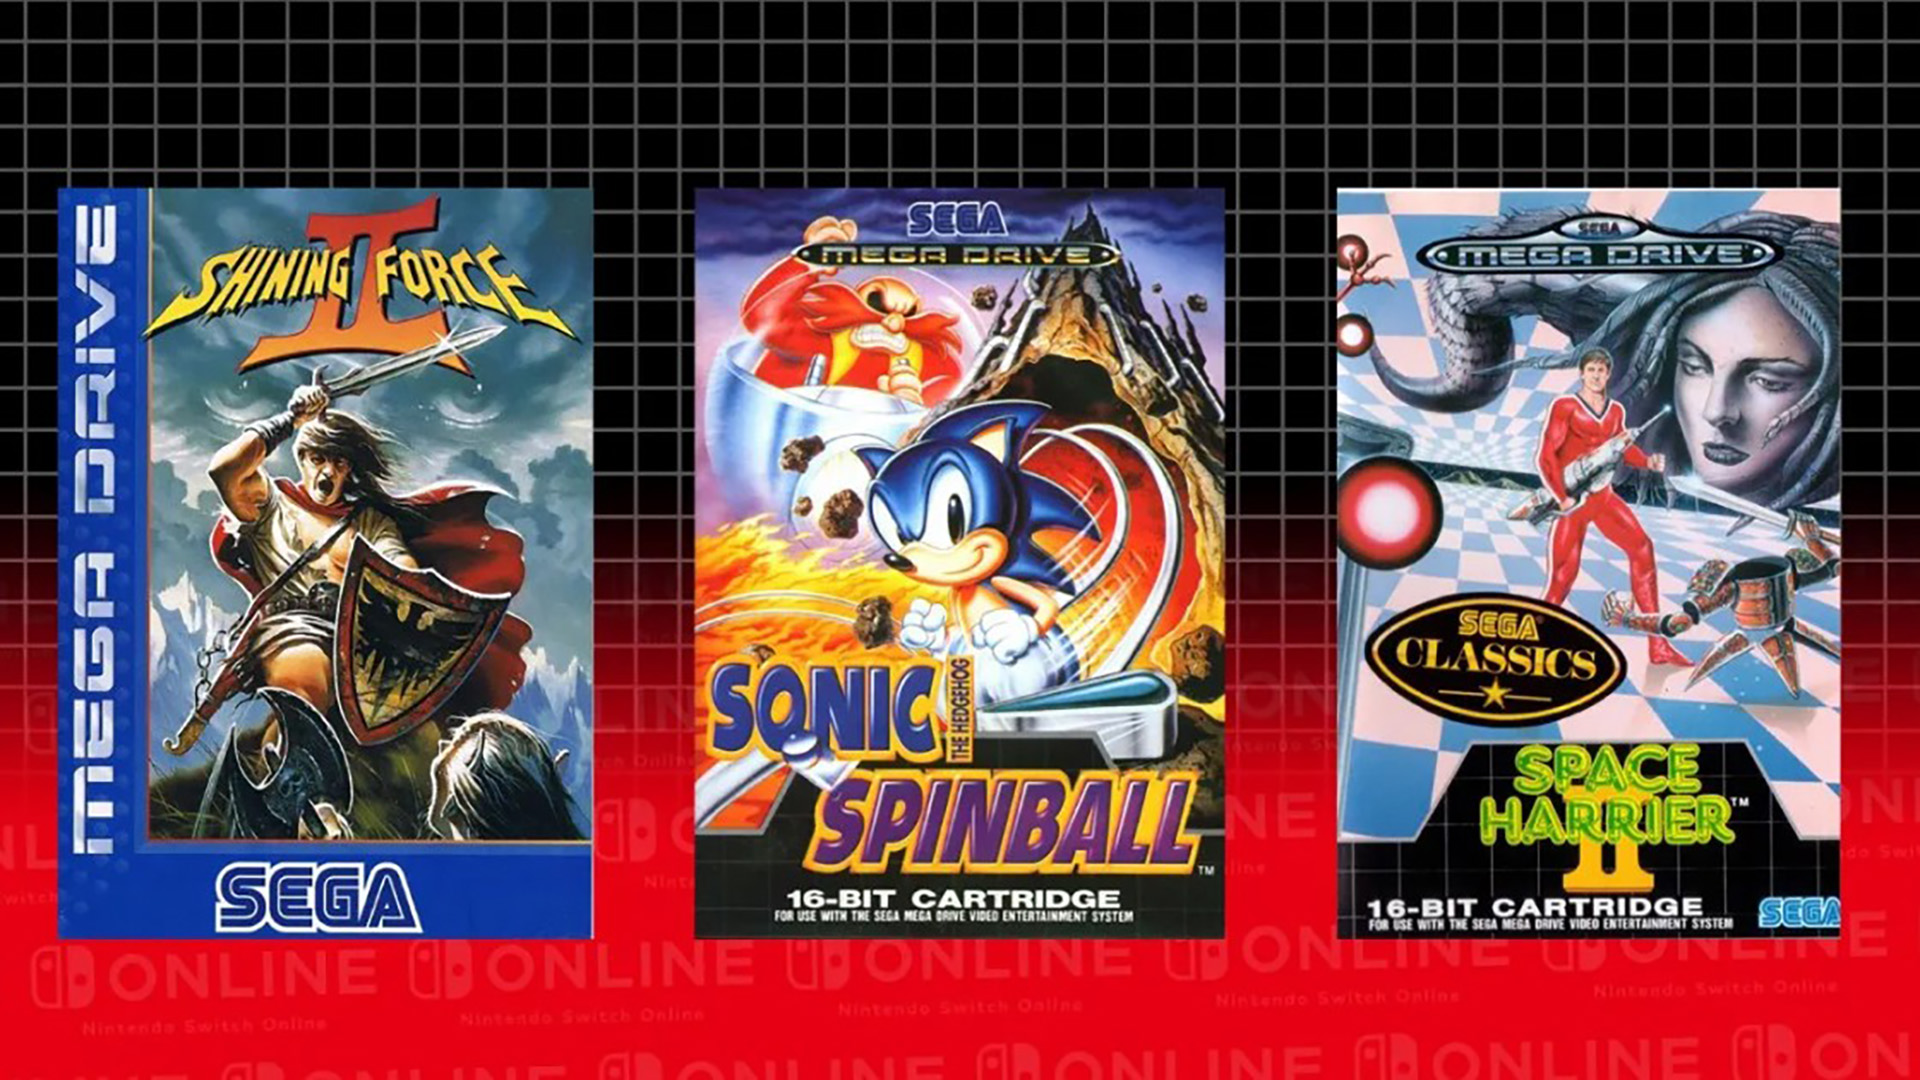 Nintendo Switch Online เพิ่มเกม Shining Force II, Sonic the Hedgehog Spinball และ Space Harrier II